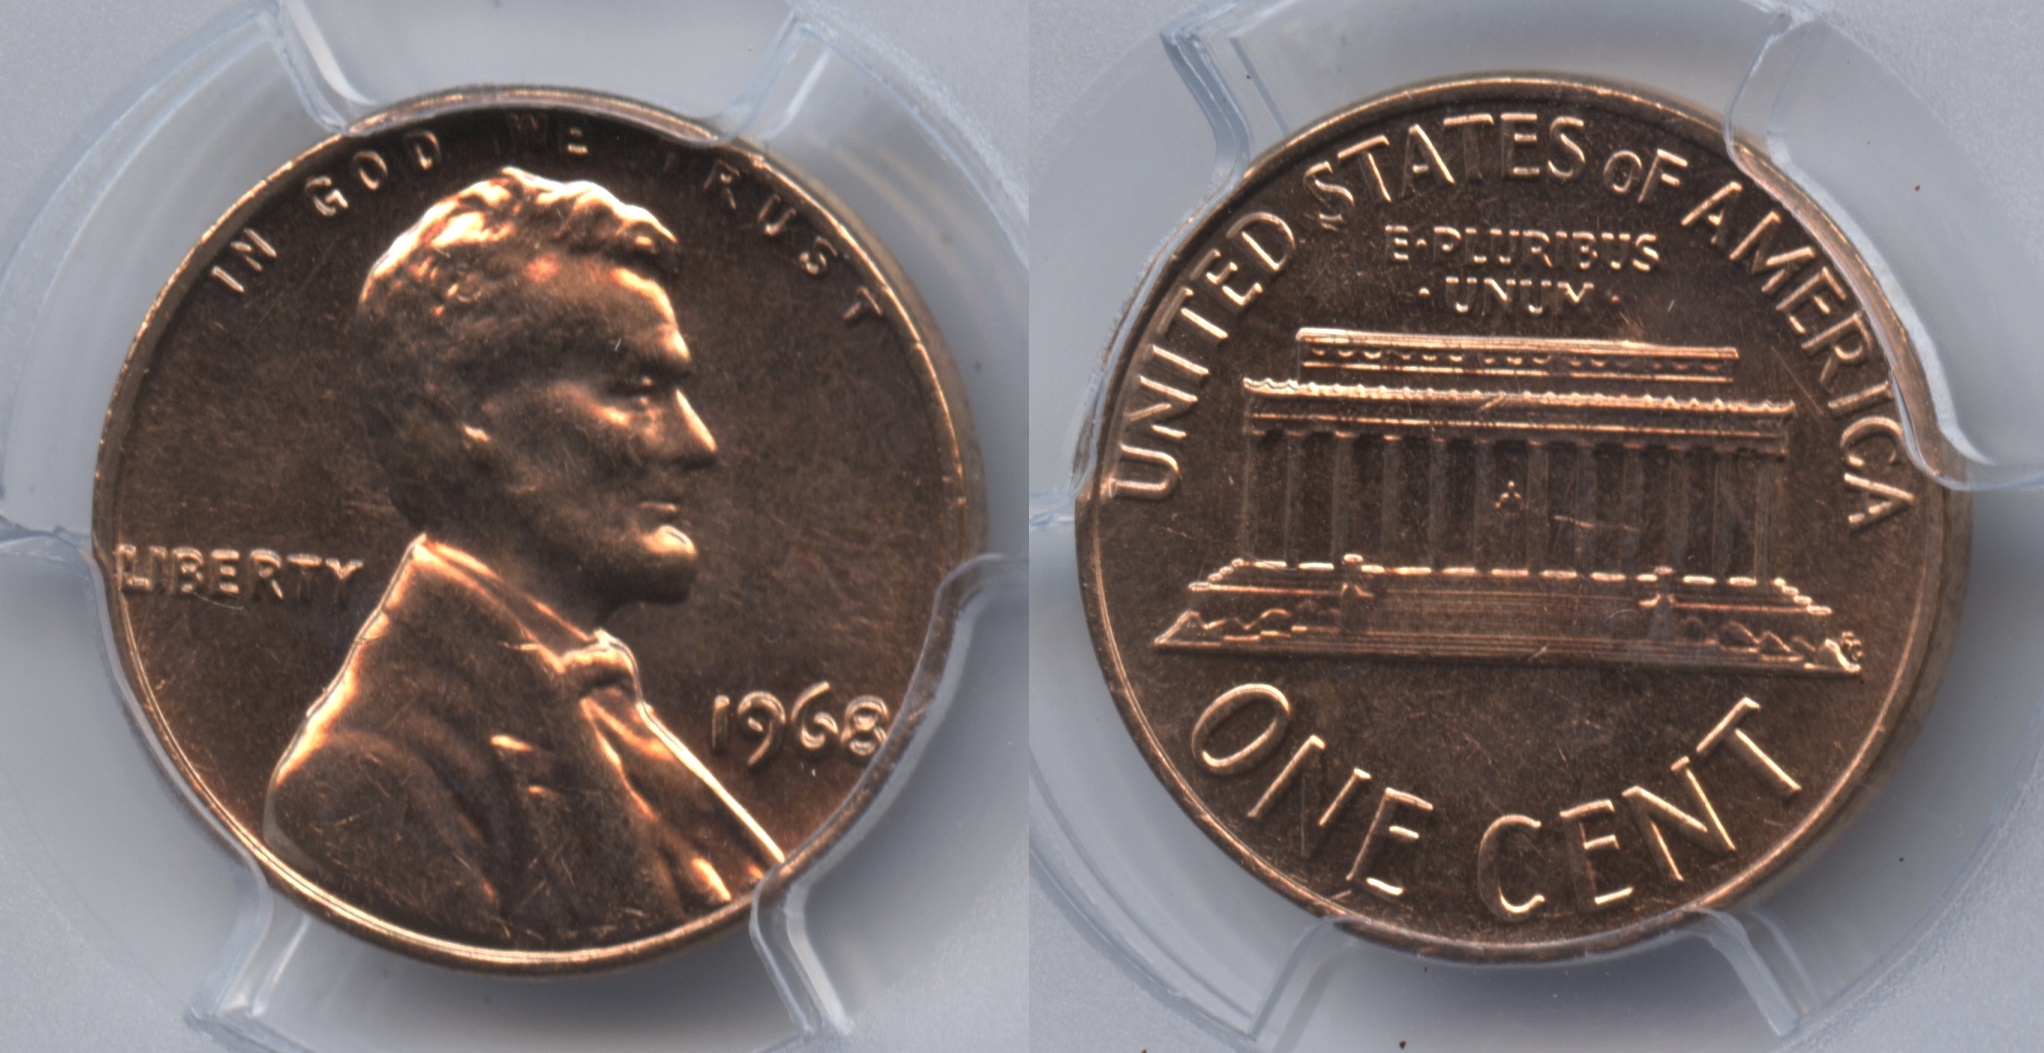 1968 Lincoln Cent PCGS MS-65 Red #i